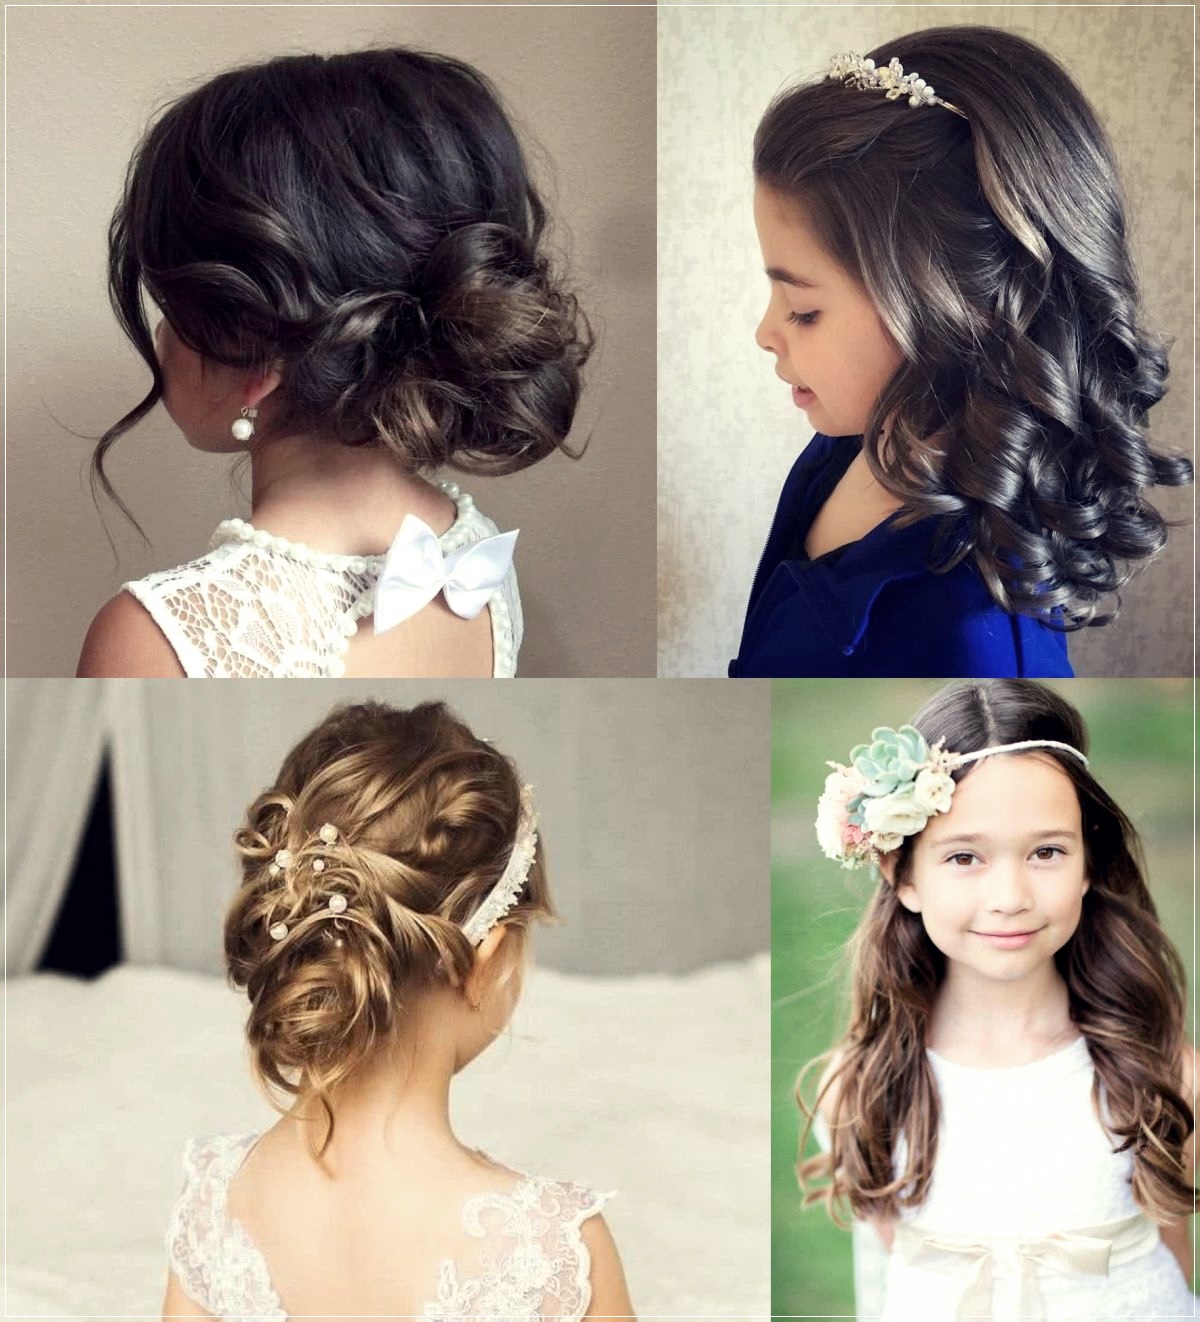 Girl hairstyles for party, ceremony or wedding